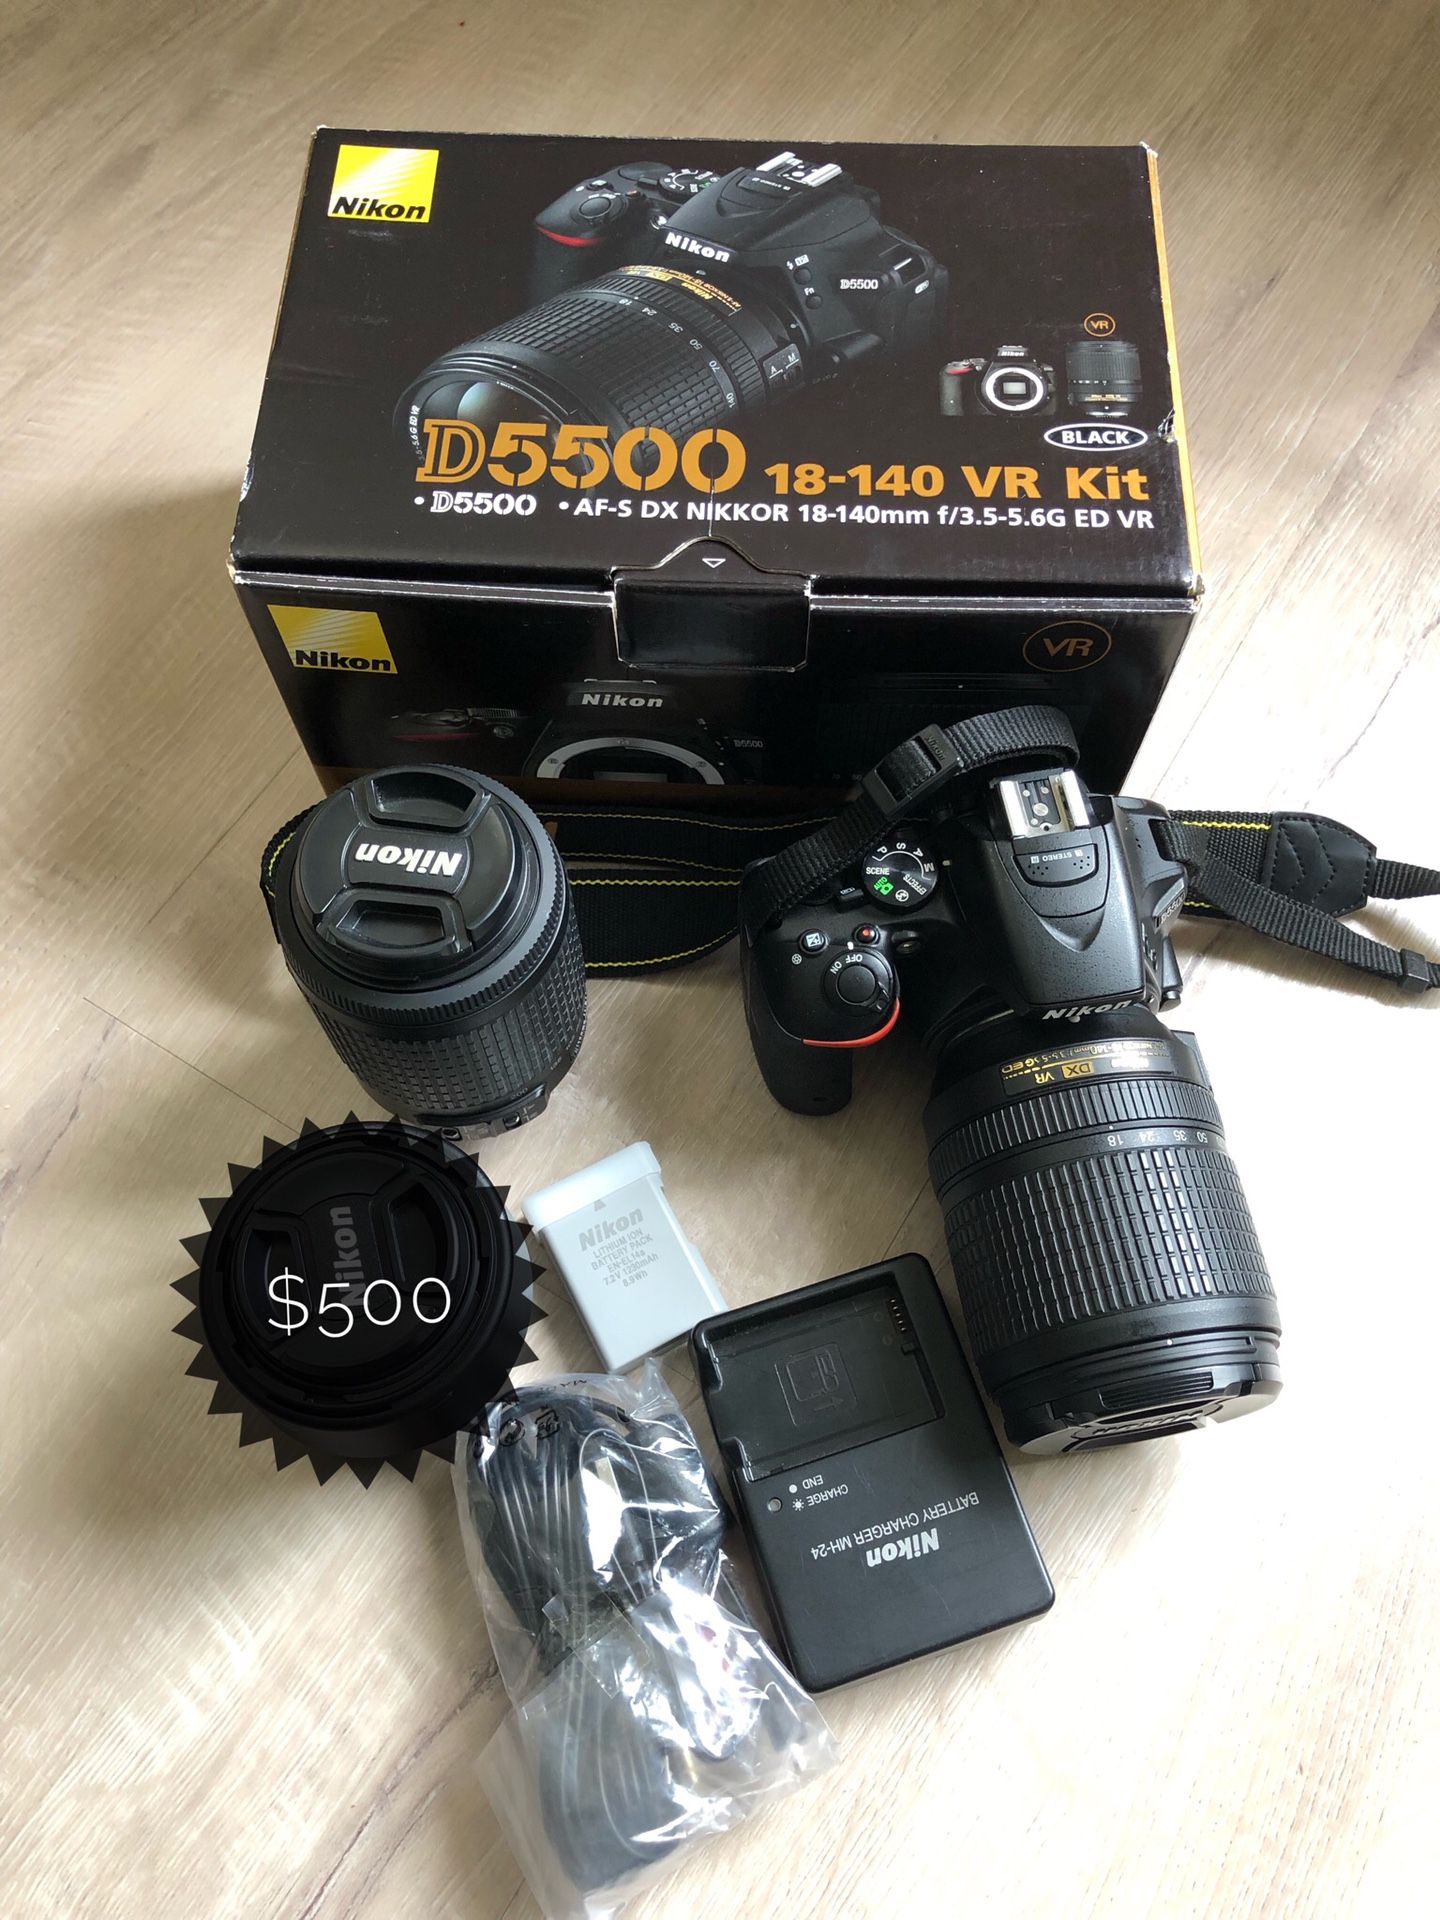 Nikon D5500 with WiFi touch screen